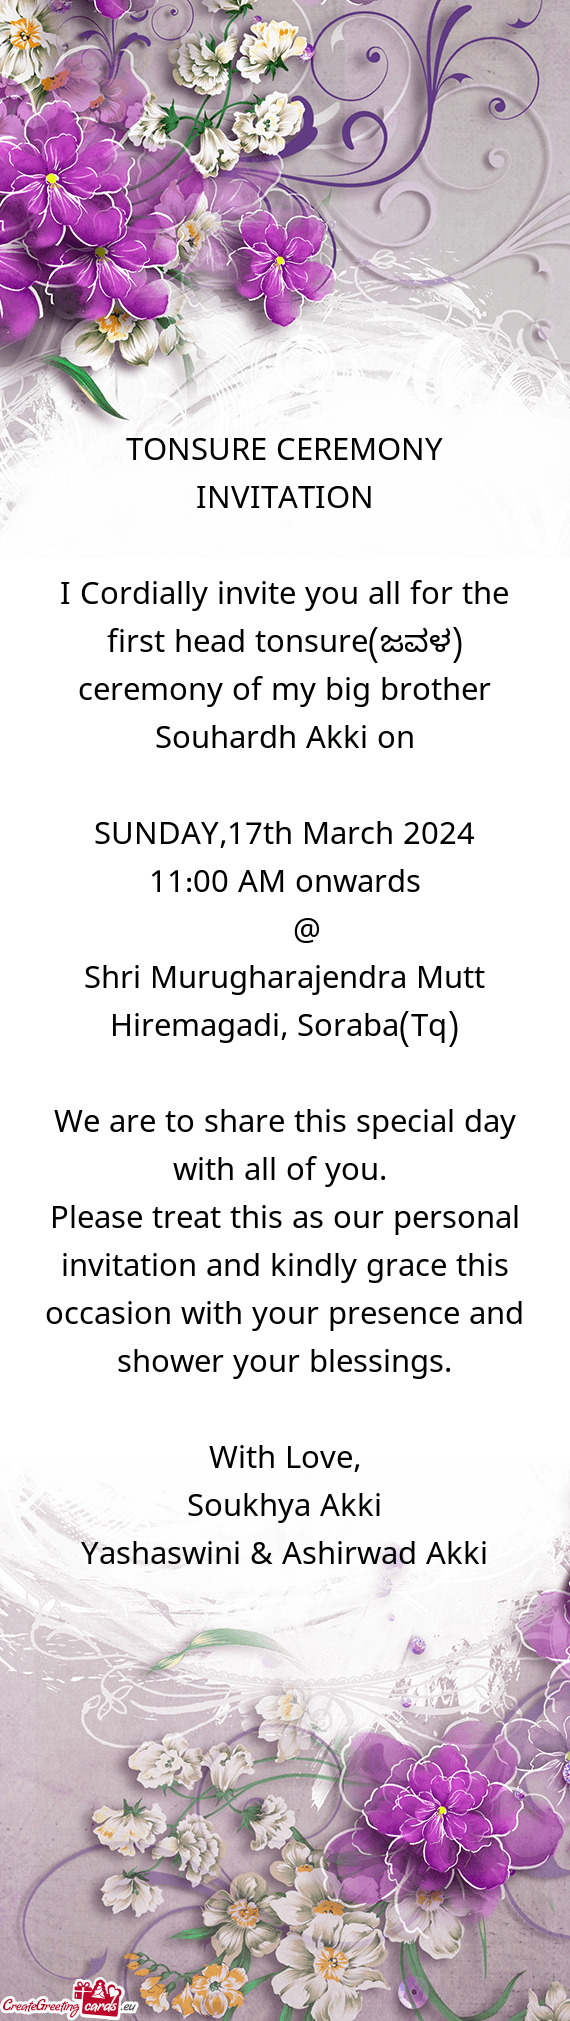 I Cordially invite you all for the first head tonsure(ಜವಳ) ceremony of my big brother Souhardh